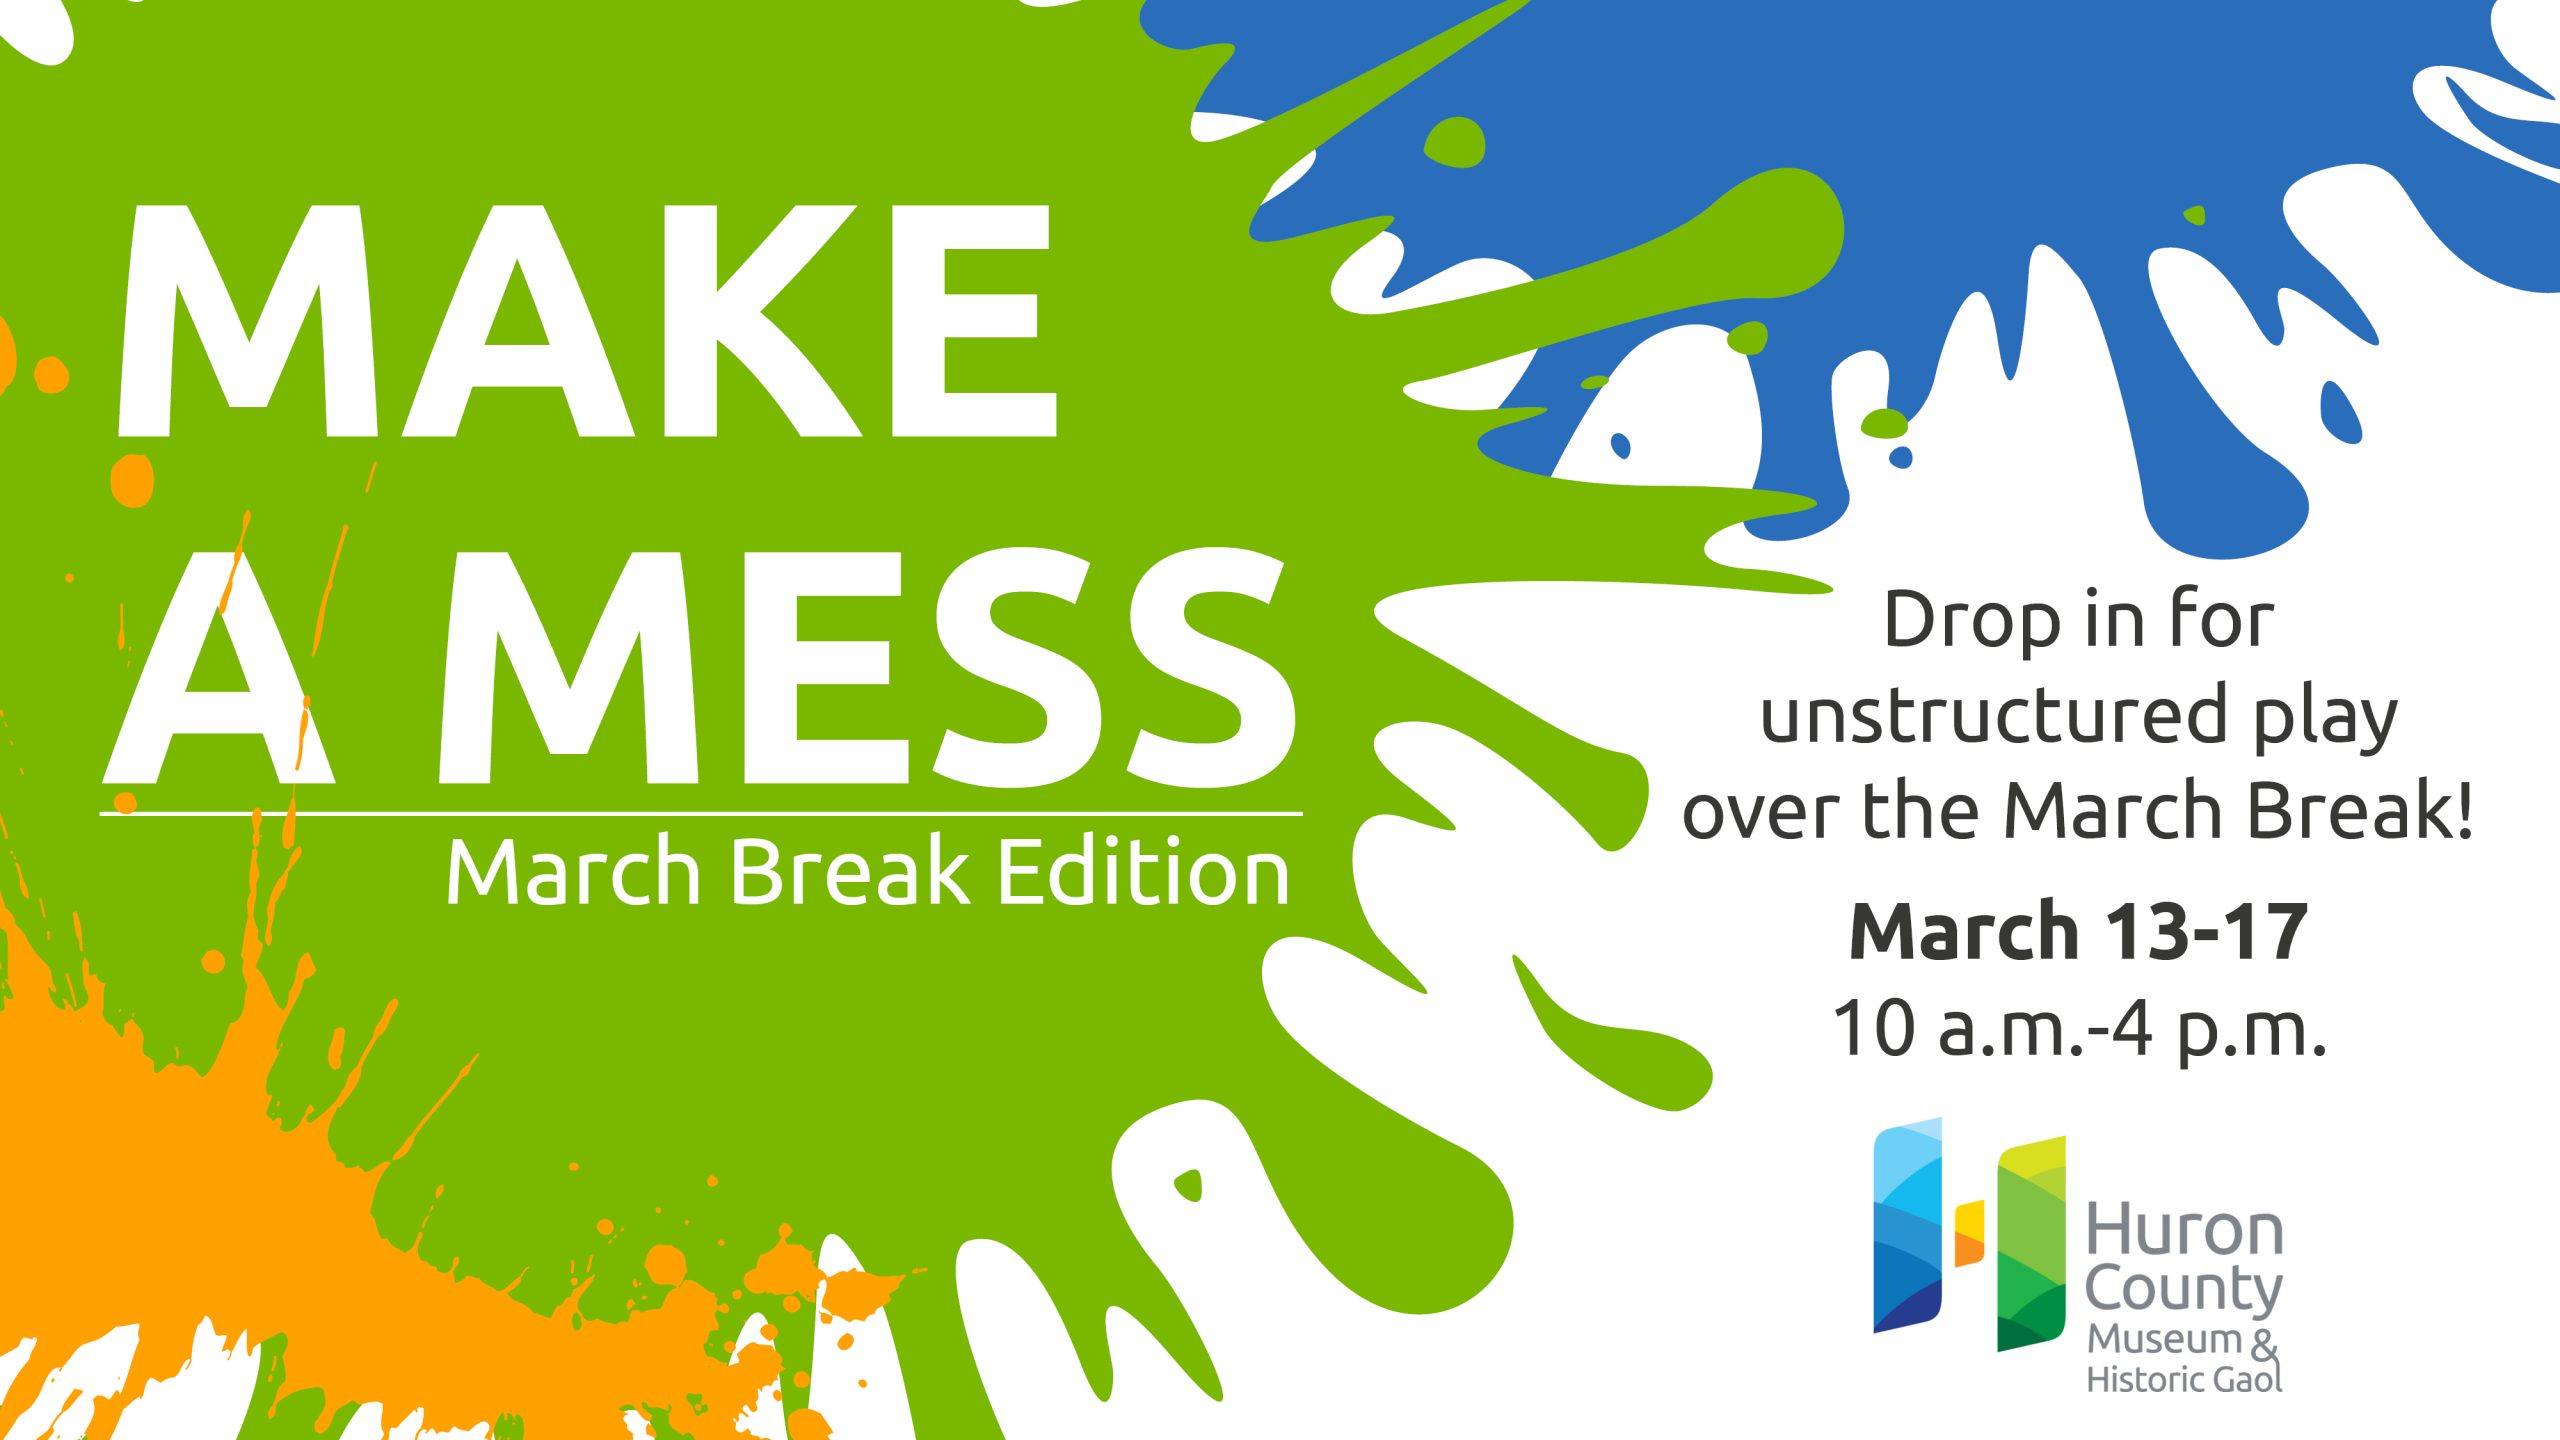 Green, orange and blue paint splatters with text promoting Make a Mess over the March Break at the Museum.